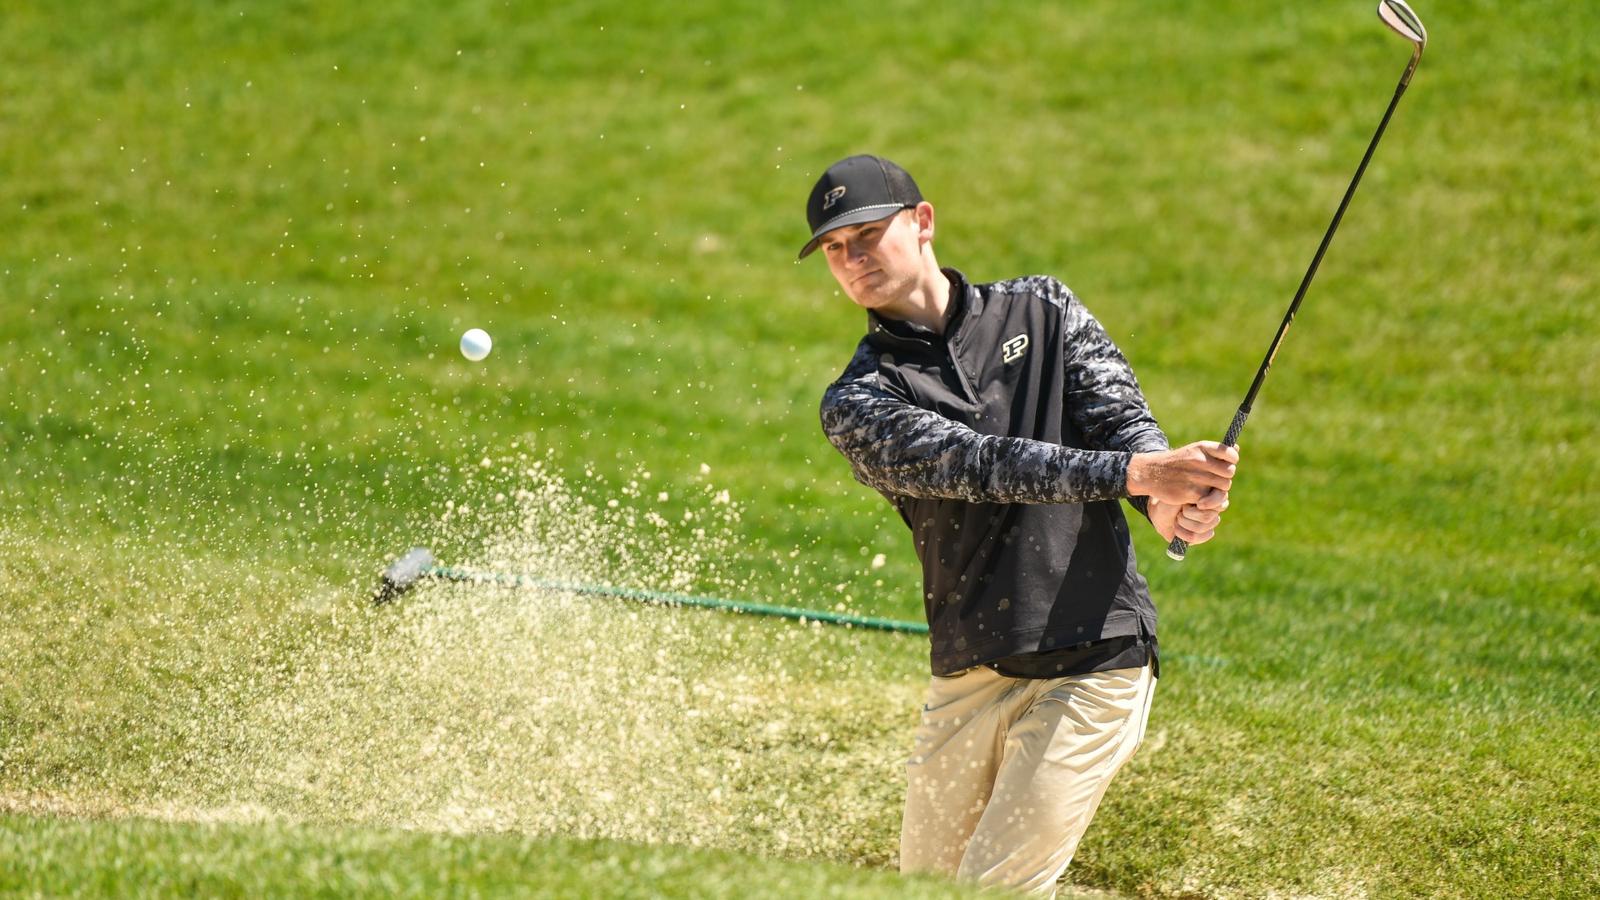 Purdue Men’s Golf Team Struggles in Wind at Big Ten Championships, Falls to 5th Place